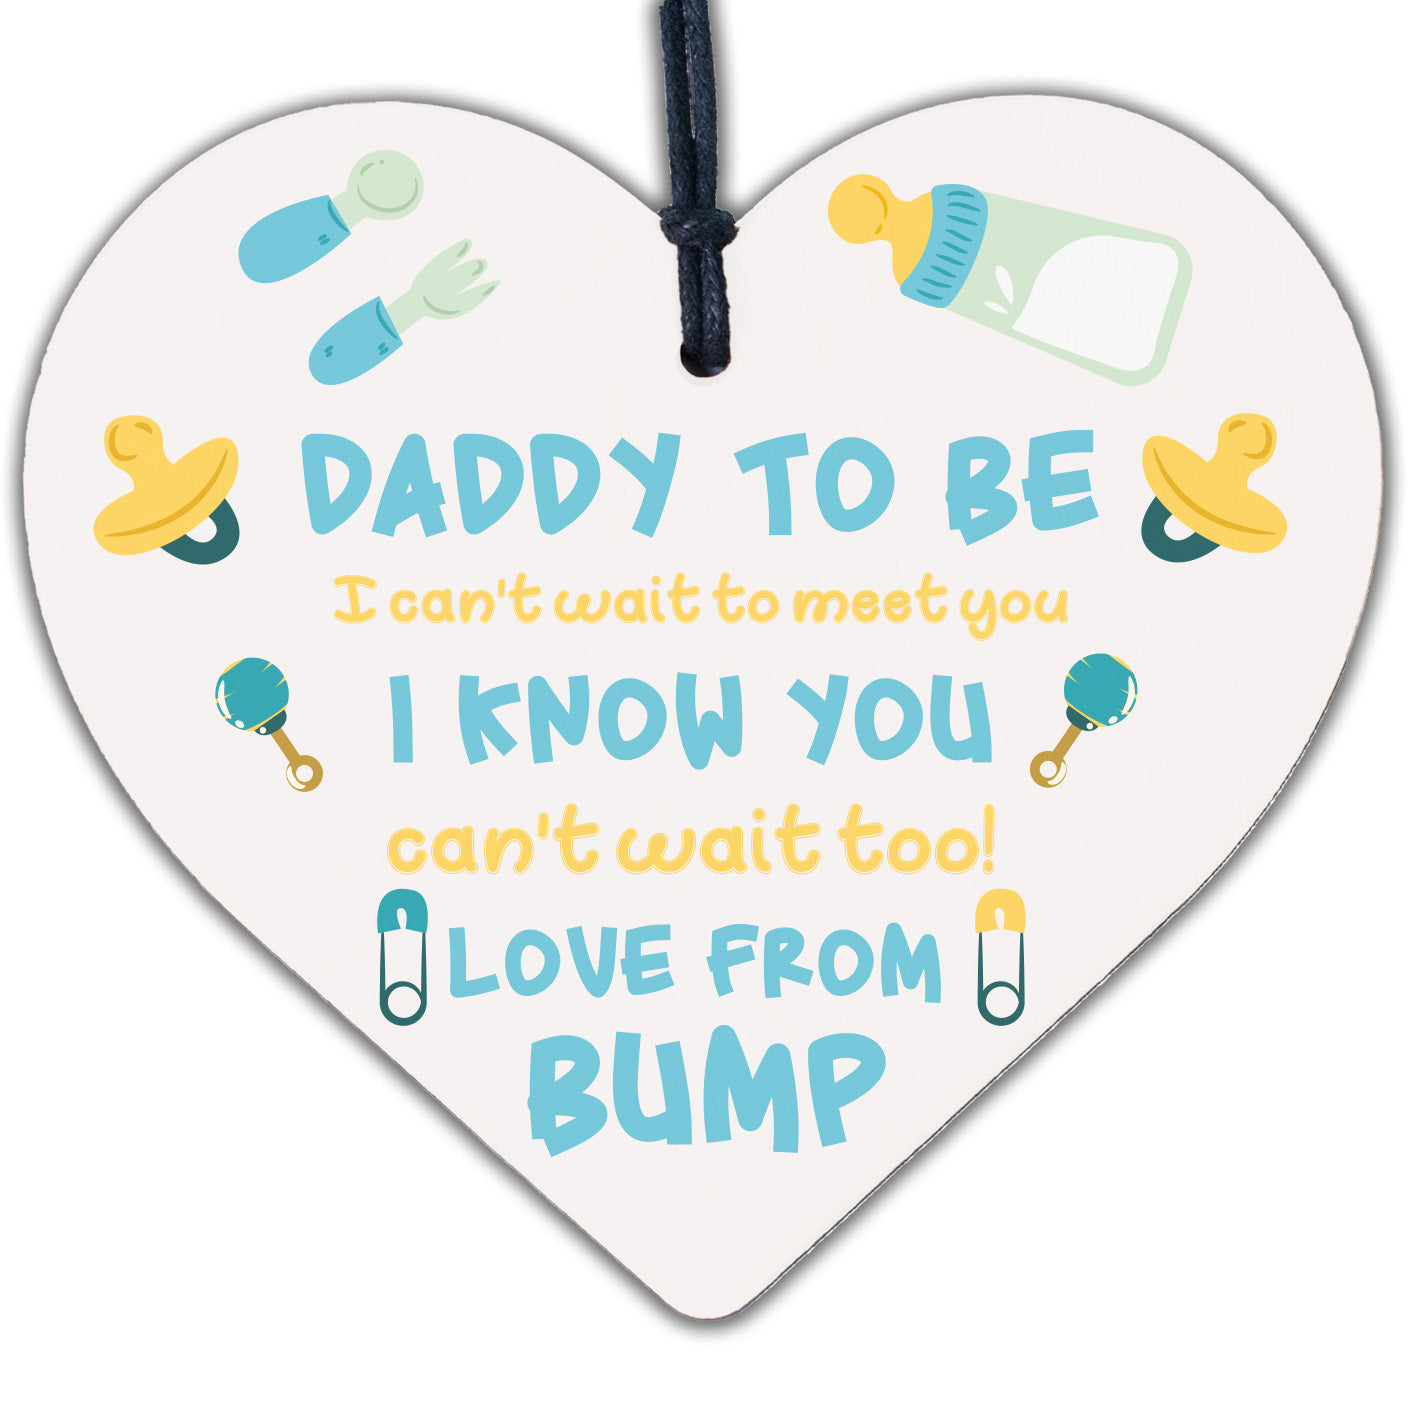 Daddy To Be Gifts Card From Bump Heart Daddy Christmas Presents Gifts For Dad